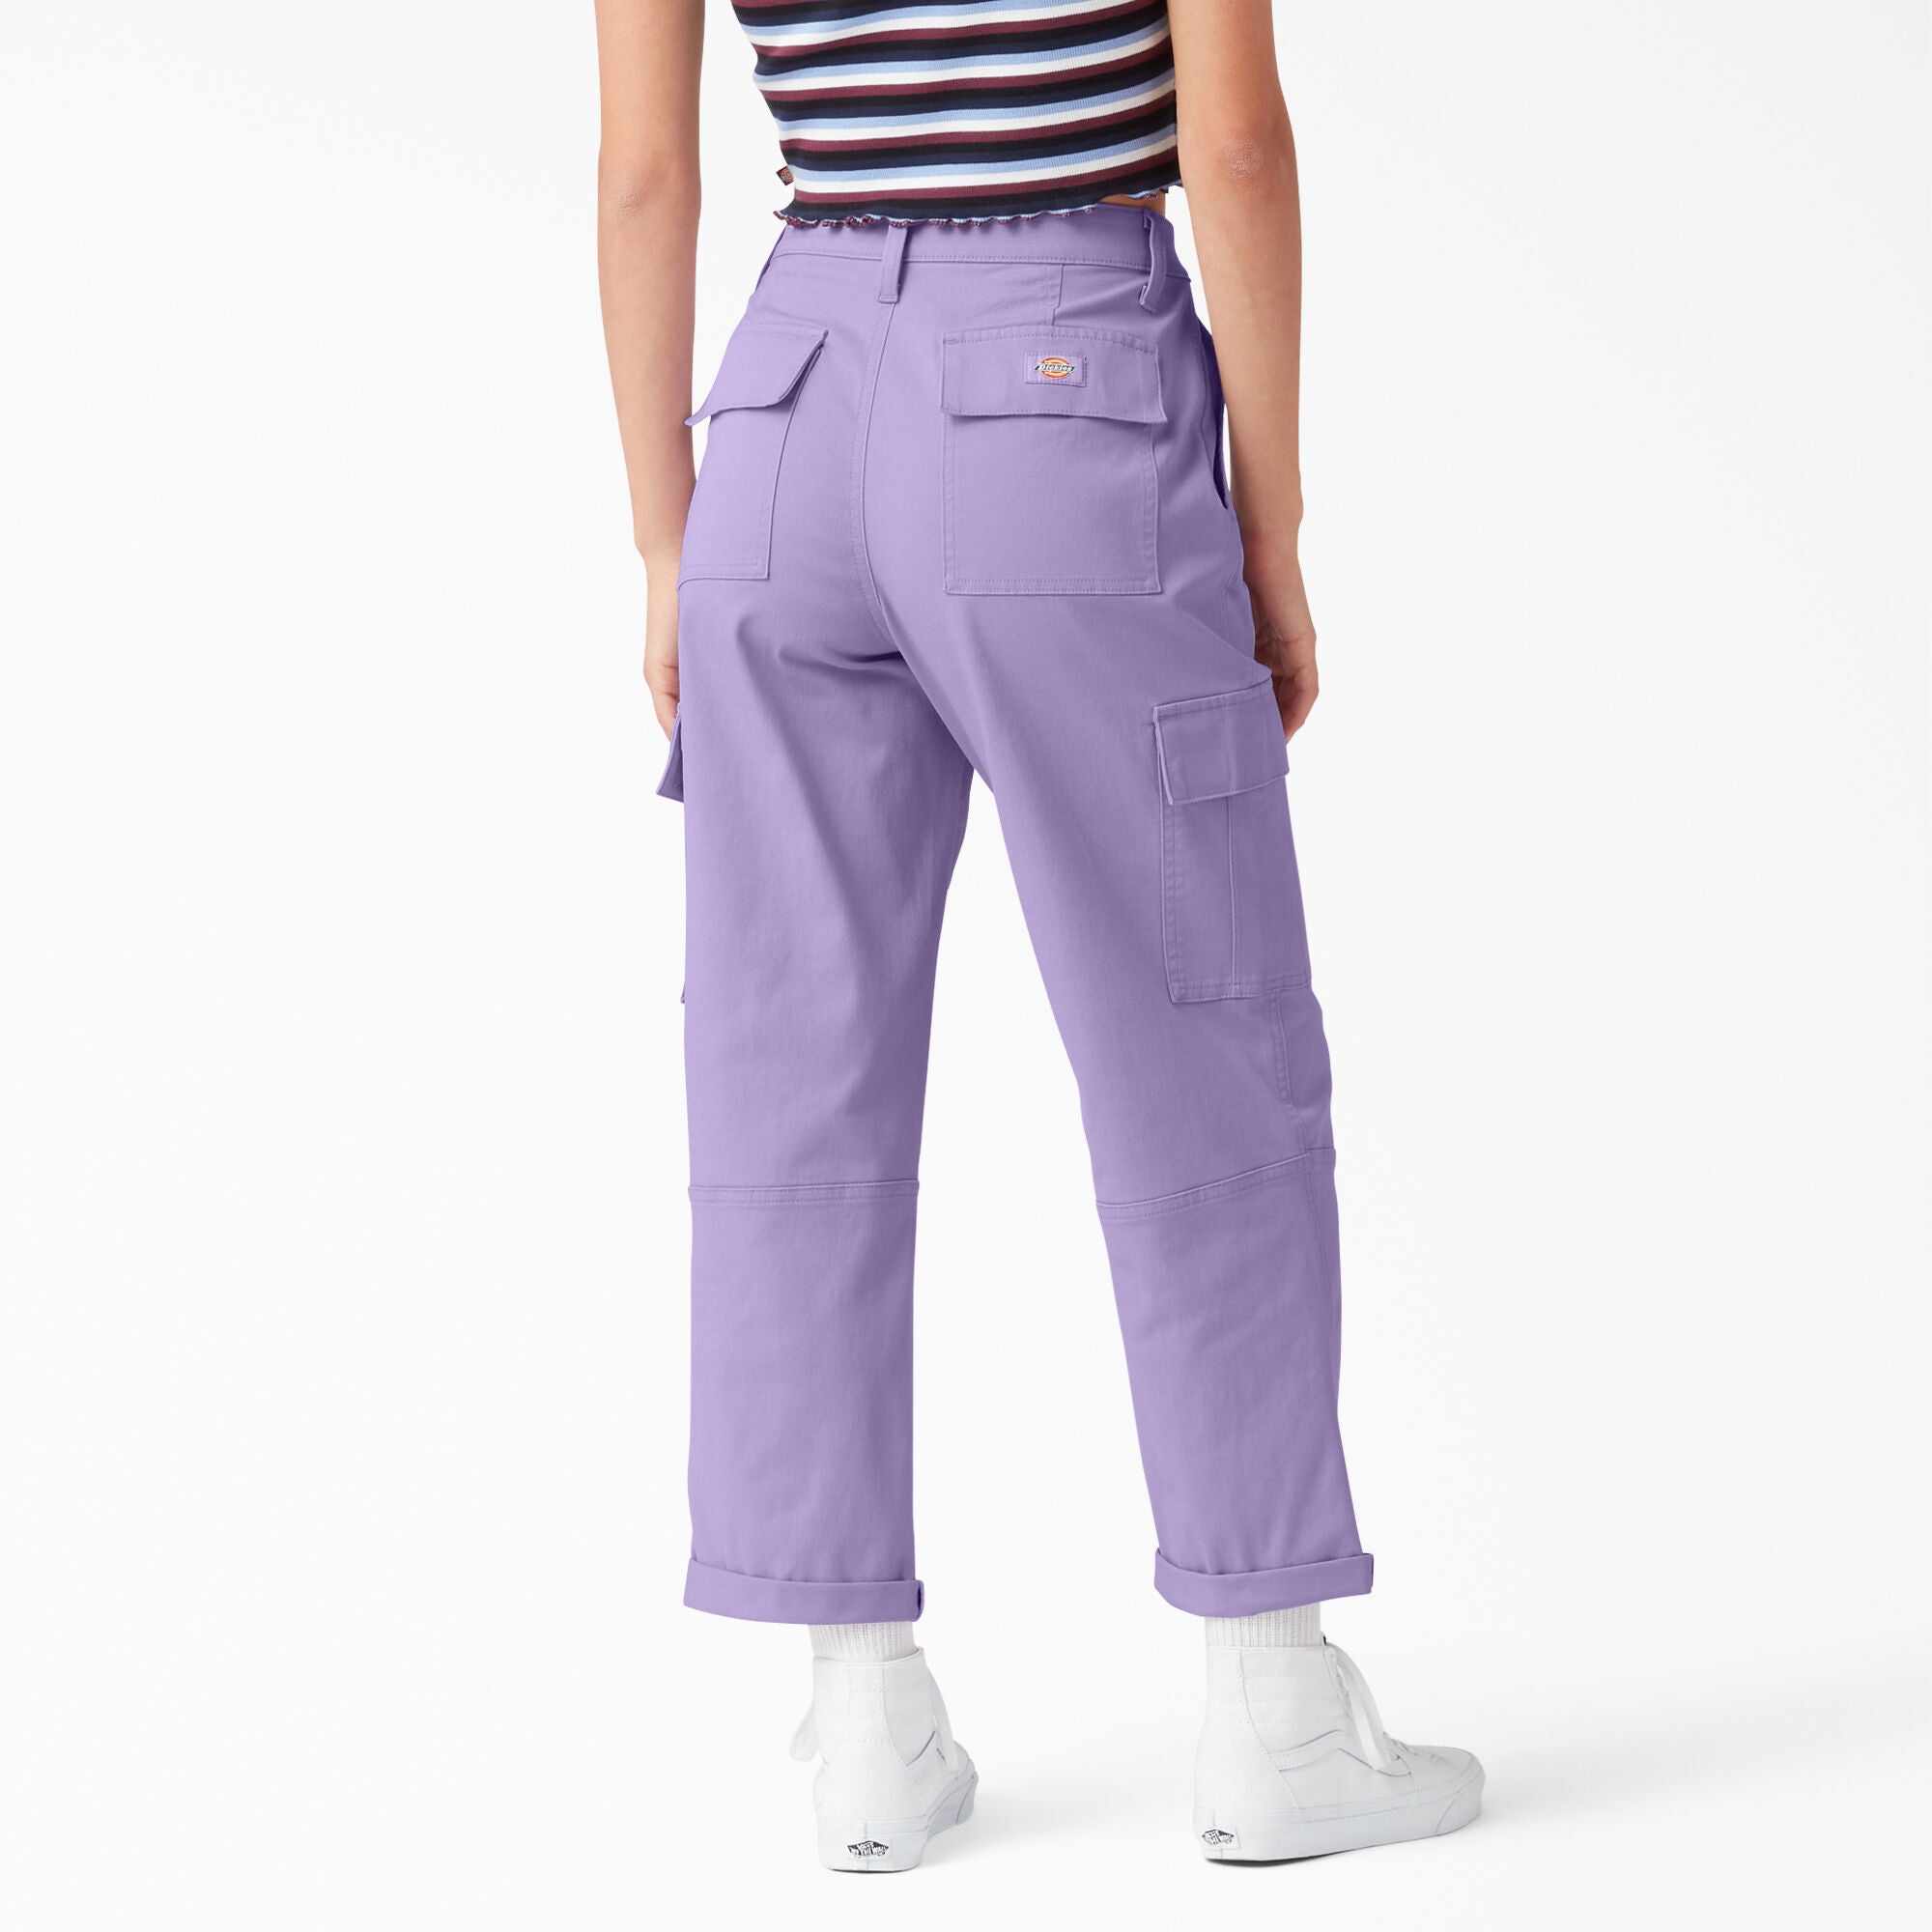 Purple Cargo Joggers: The Perfect Blend of Style and Comfort